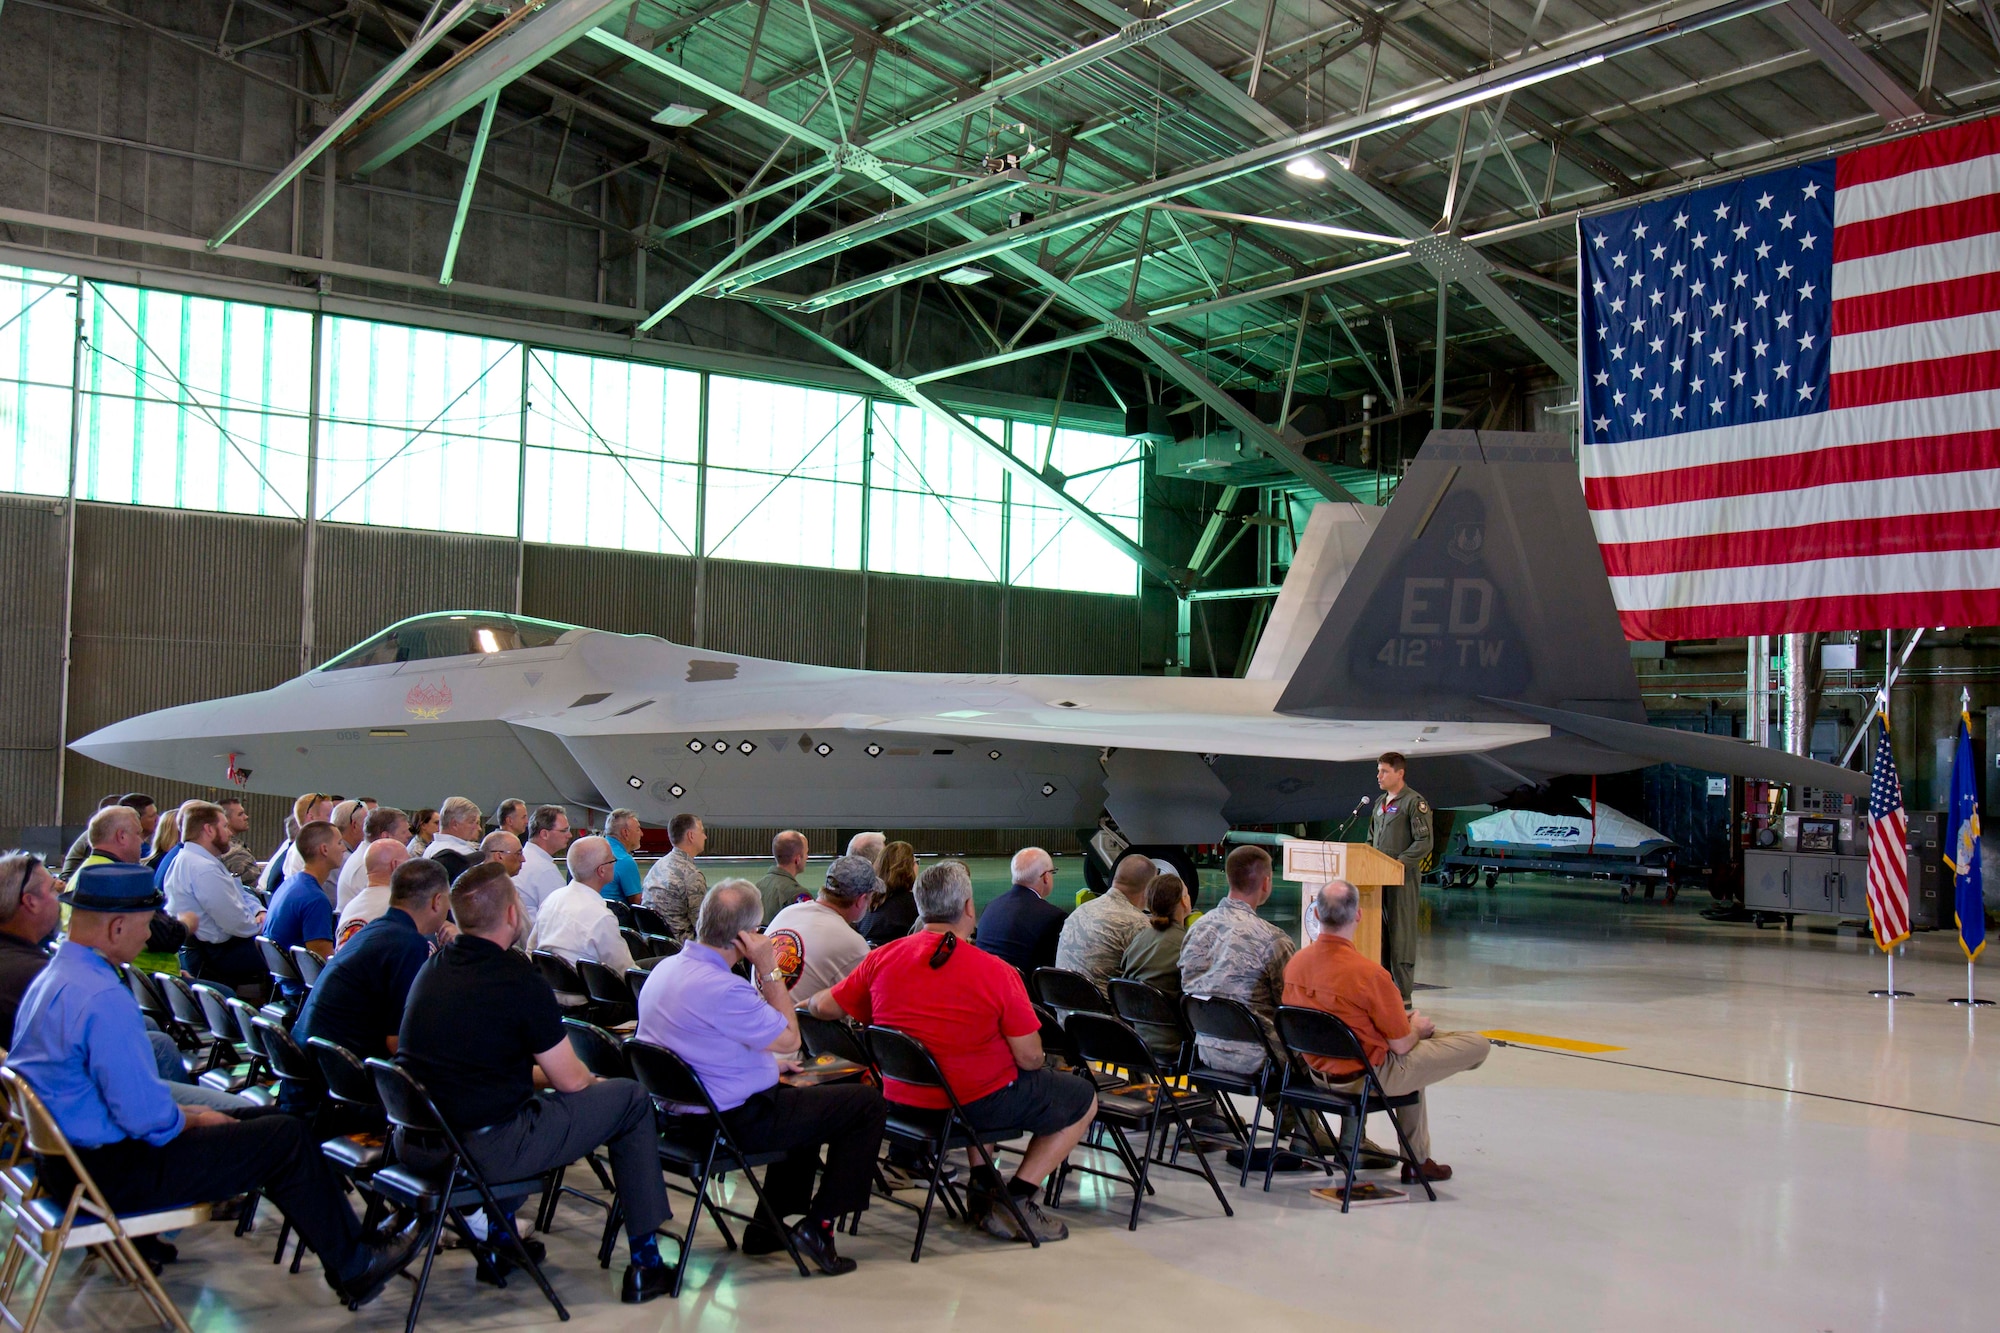 Lt. Col. Lee Bryant, 411th Flight Test Squadron commander and F-22 Combined Test Force director, addresses base leadership along with Lockheed Martin and Boeing representatives and guests, to welcome back to life Raptor # 91-4006, which has been on the ground for almost six years. (Courtesy photo by Christopher Higgins/Lockheed Martin)